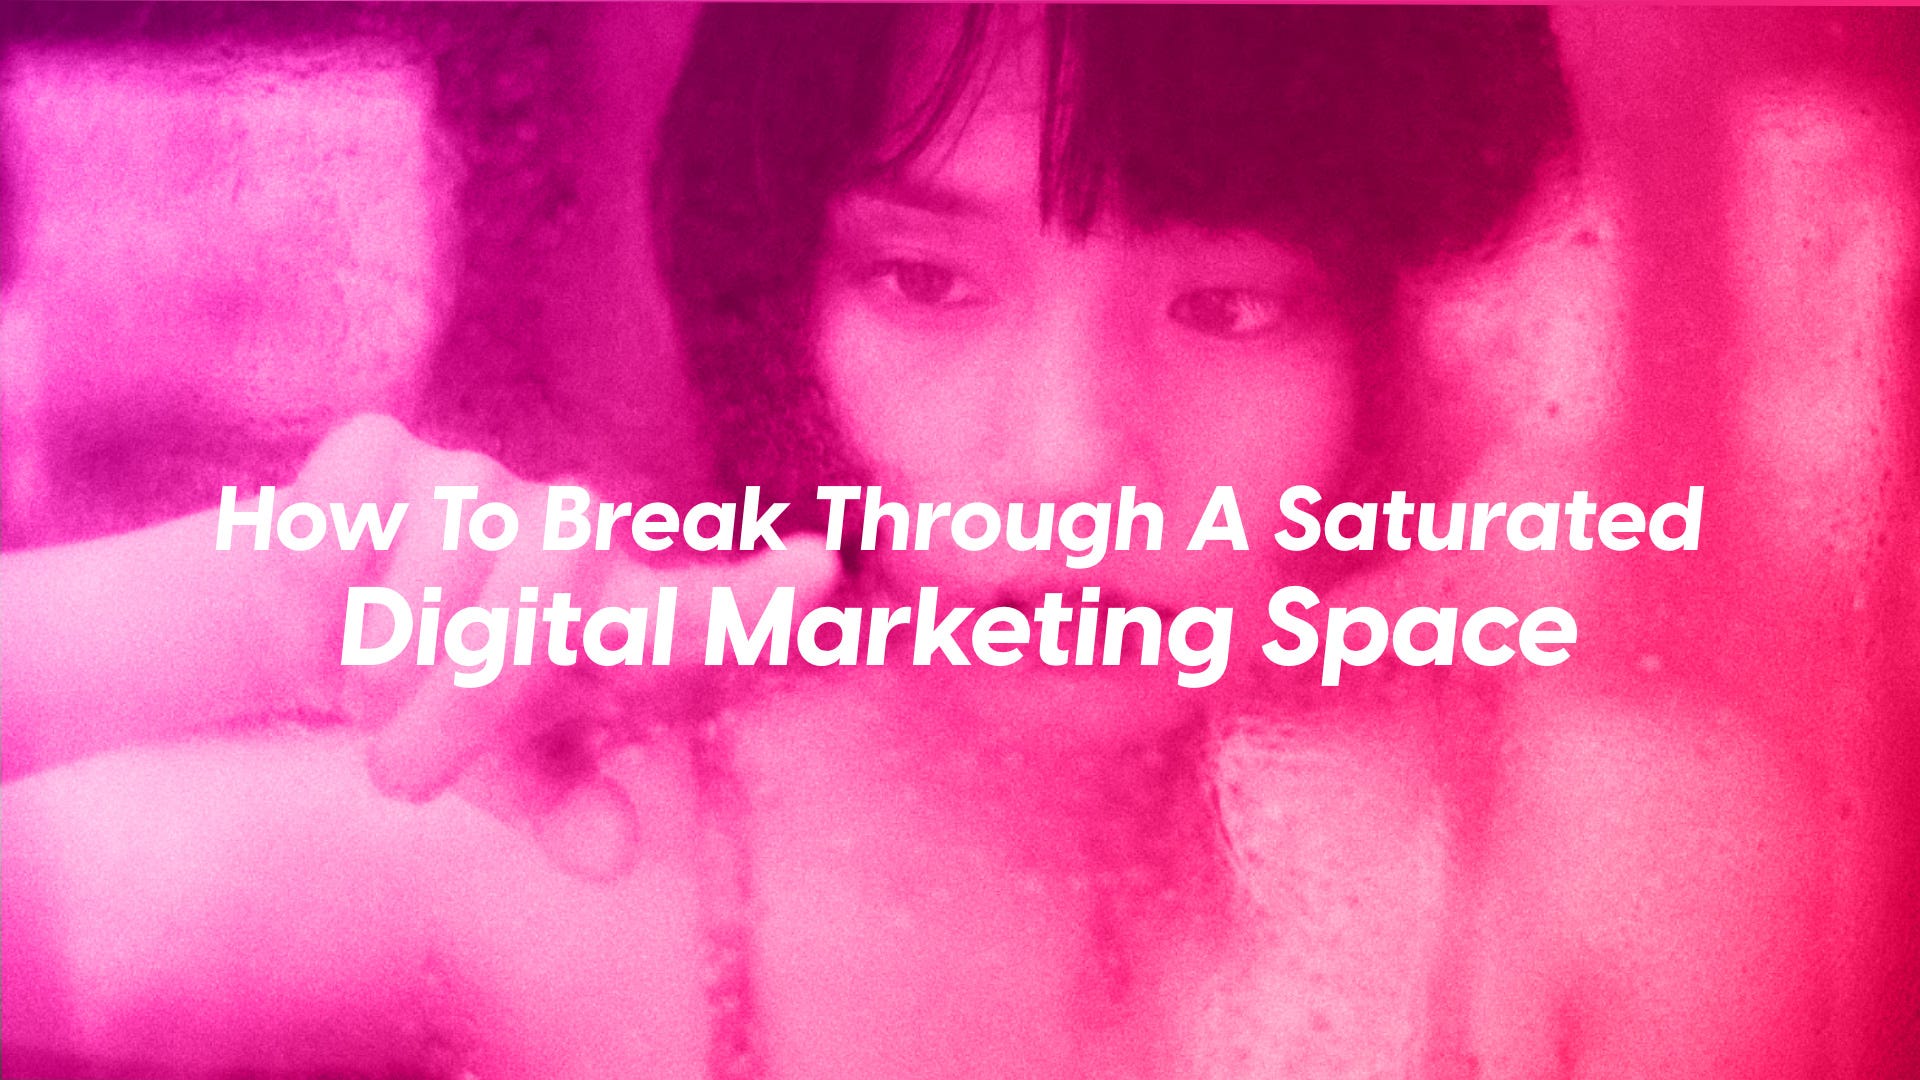 How to break through a saturated digital marketing space